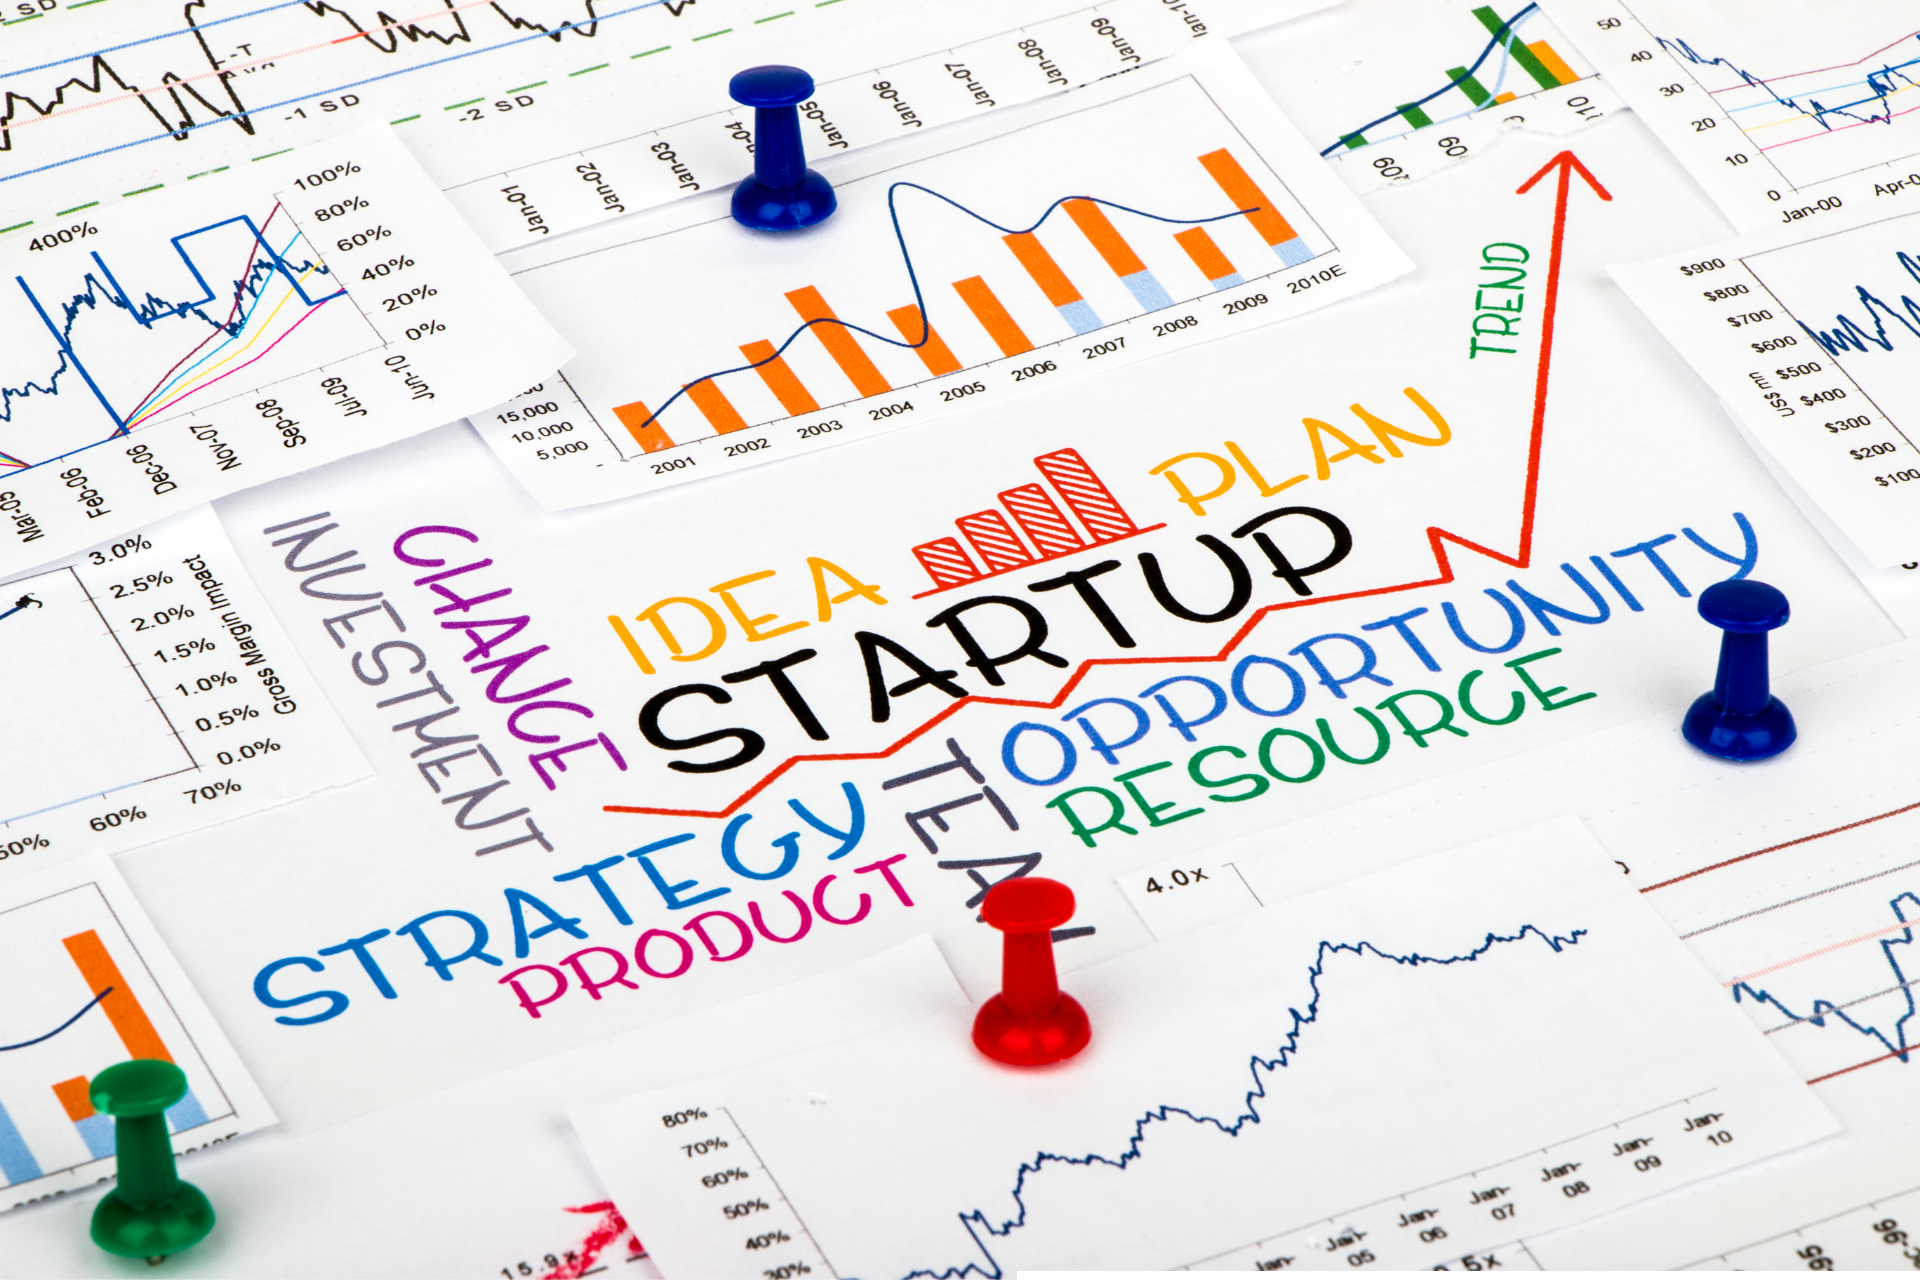 You can see a number of tables, graphs, and figures with numbers and trend developments. In the middle "Startup" is written in capital letters and around it Idea, Plan, Strategy, Opportunity, Product, Team, and Resource.